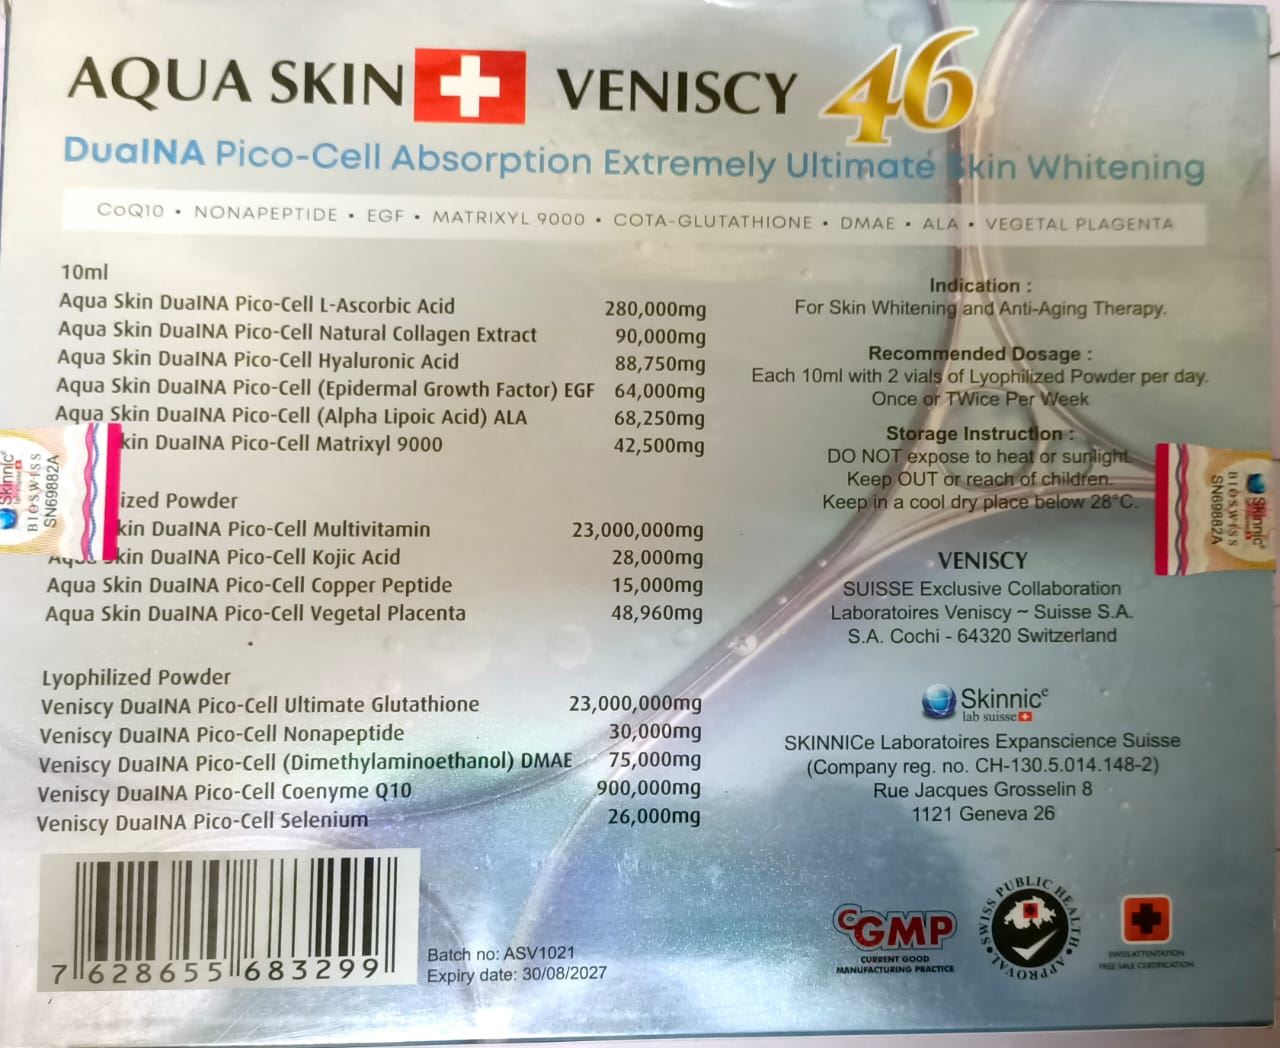 Aqua Skin Veniscy 46 Dualna Pico-cell absorbtion Extremely Ultimate Glutathione Injection reviews